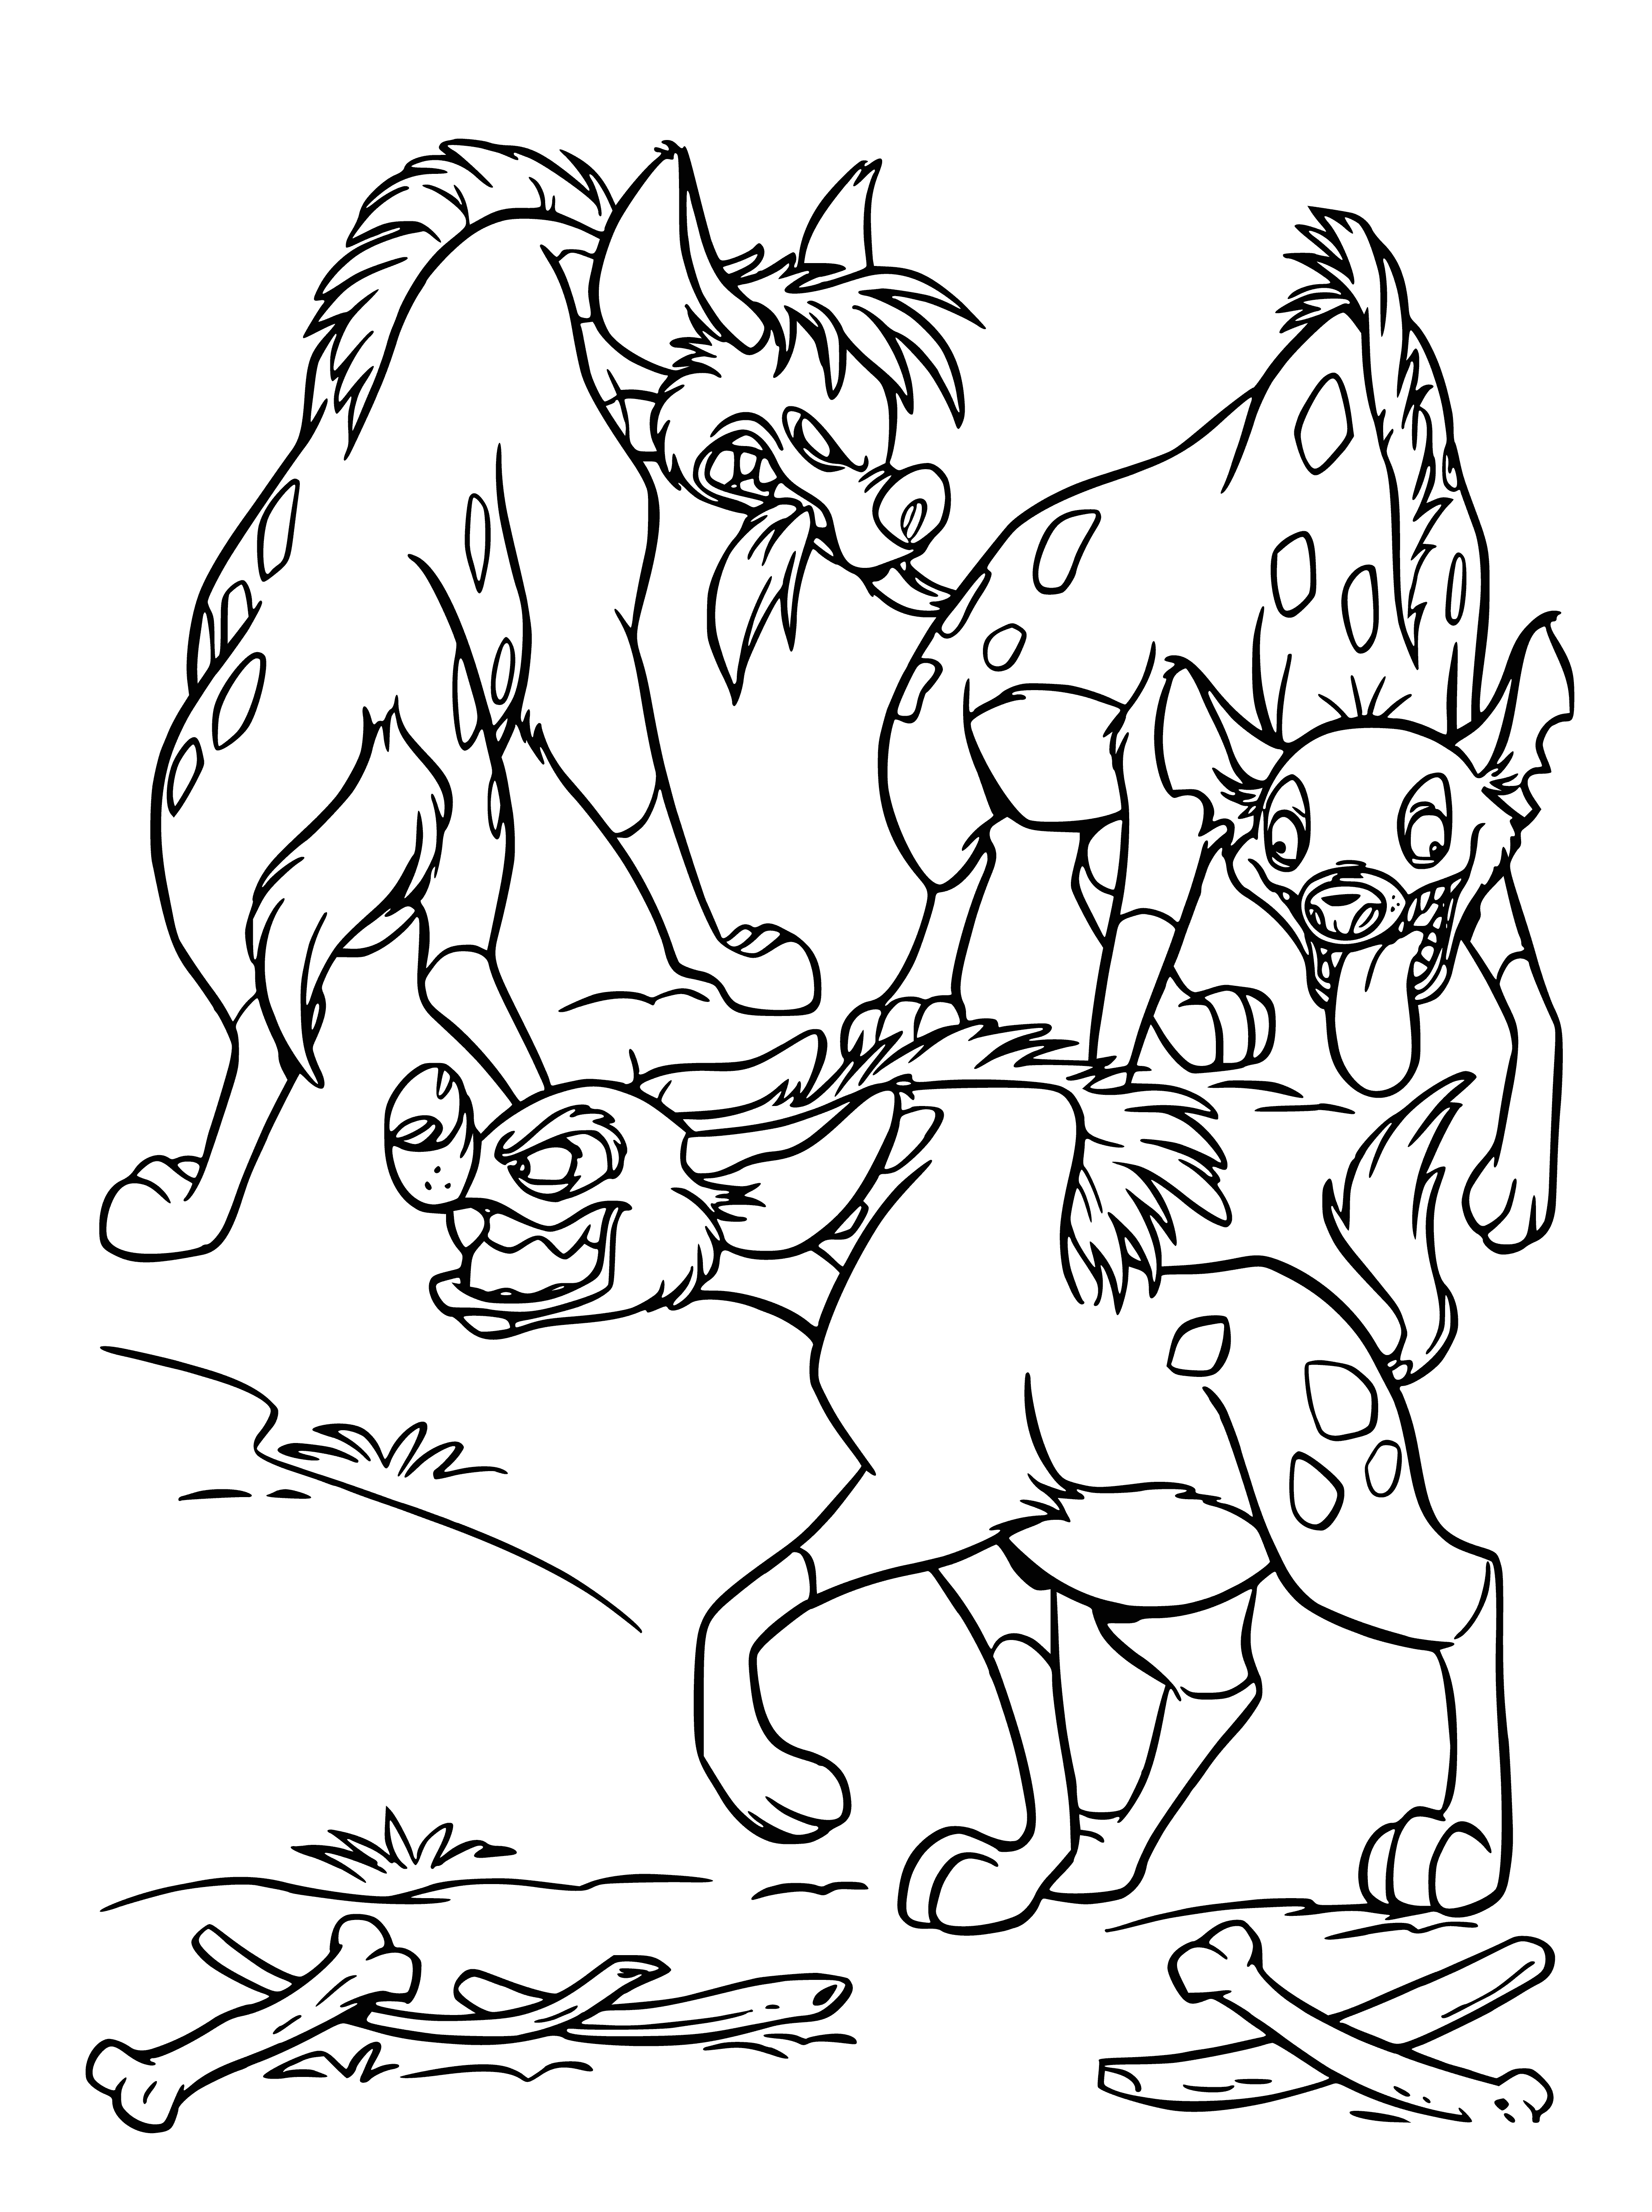 Hyena robbers coloring page